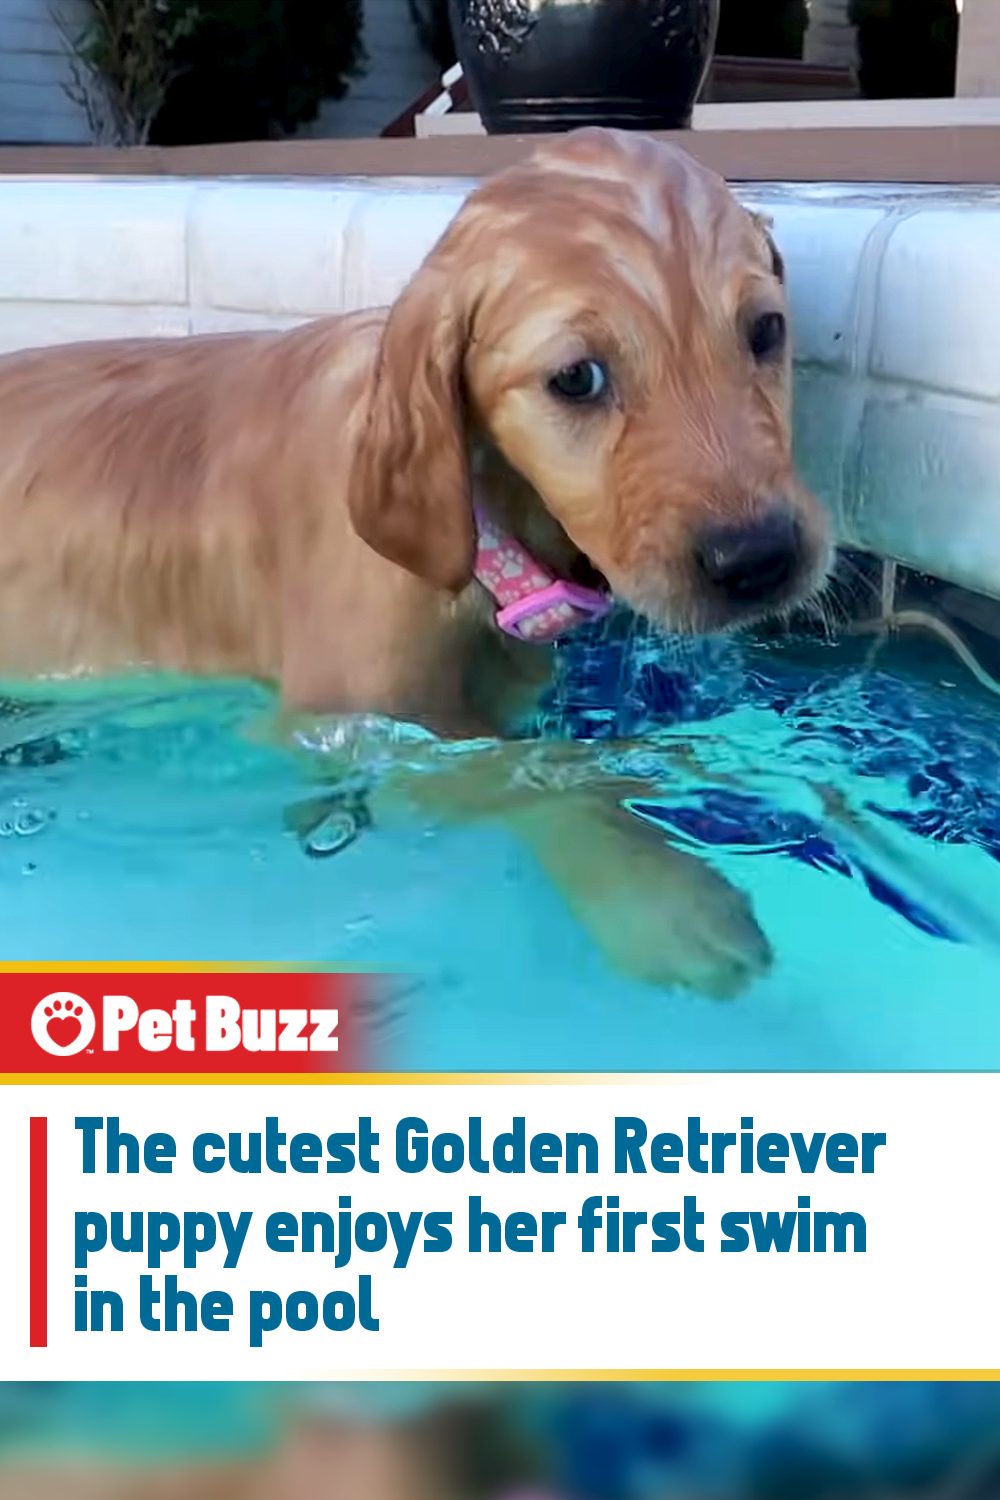 The cutest Golden Retriever puppy enjoys her first swim in the pool